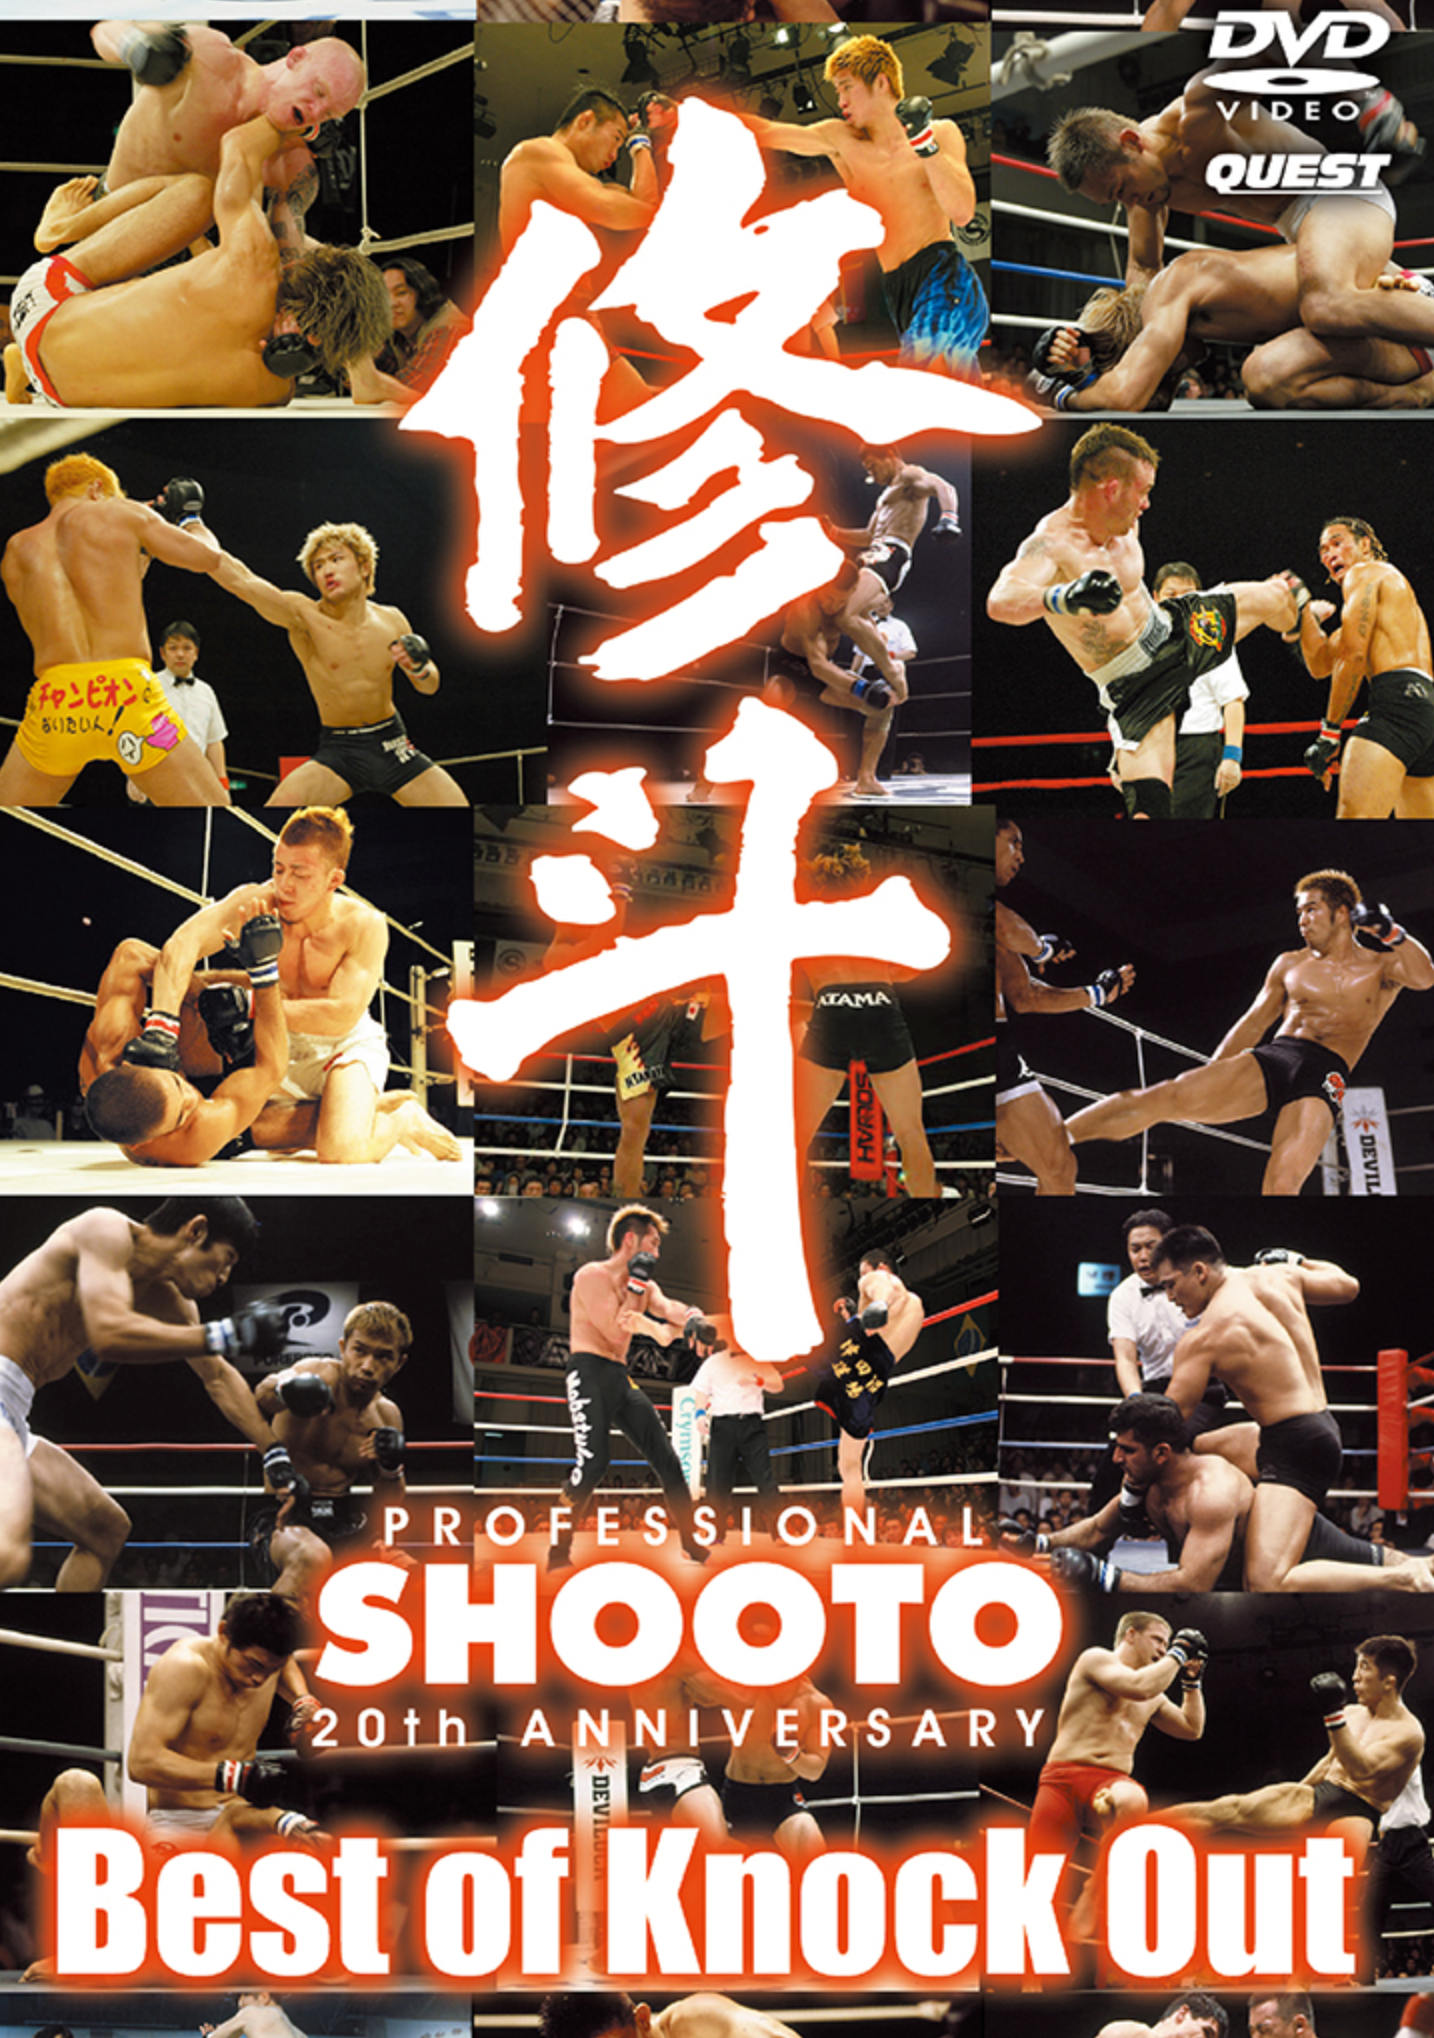 Shooto 20th Anniversary: Best of Knockouts DVD - Budovideos Inc